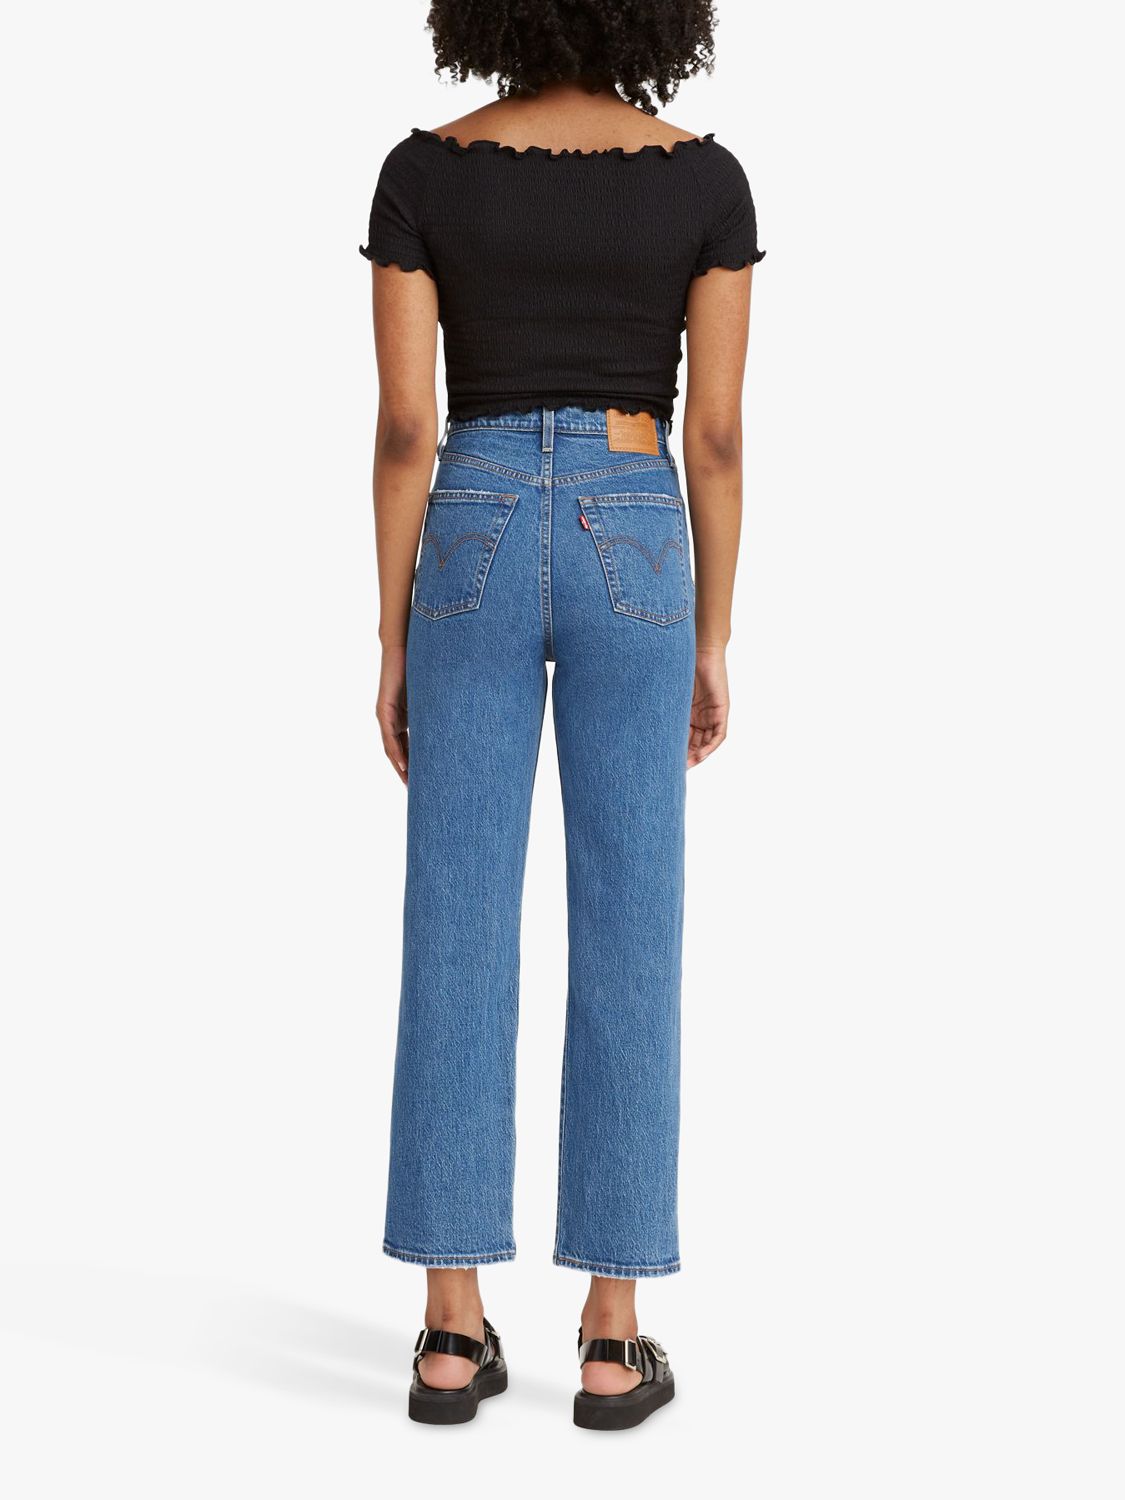 Buy Levi's Ribcage Straight Cut Cropped Jeans Online at johnlewis.com